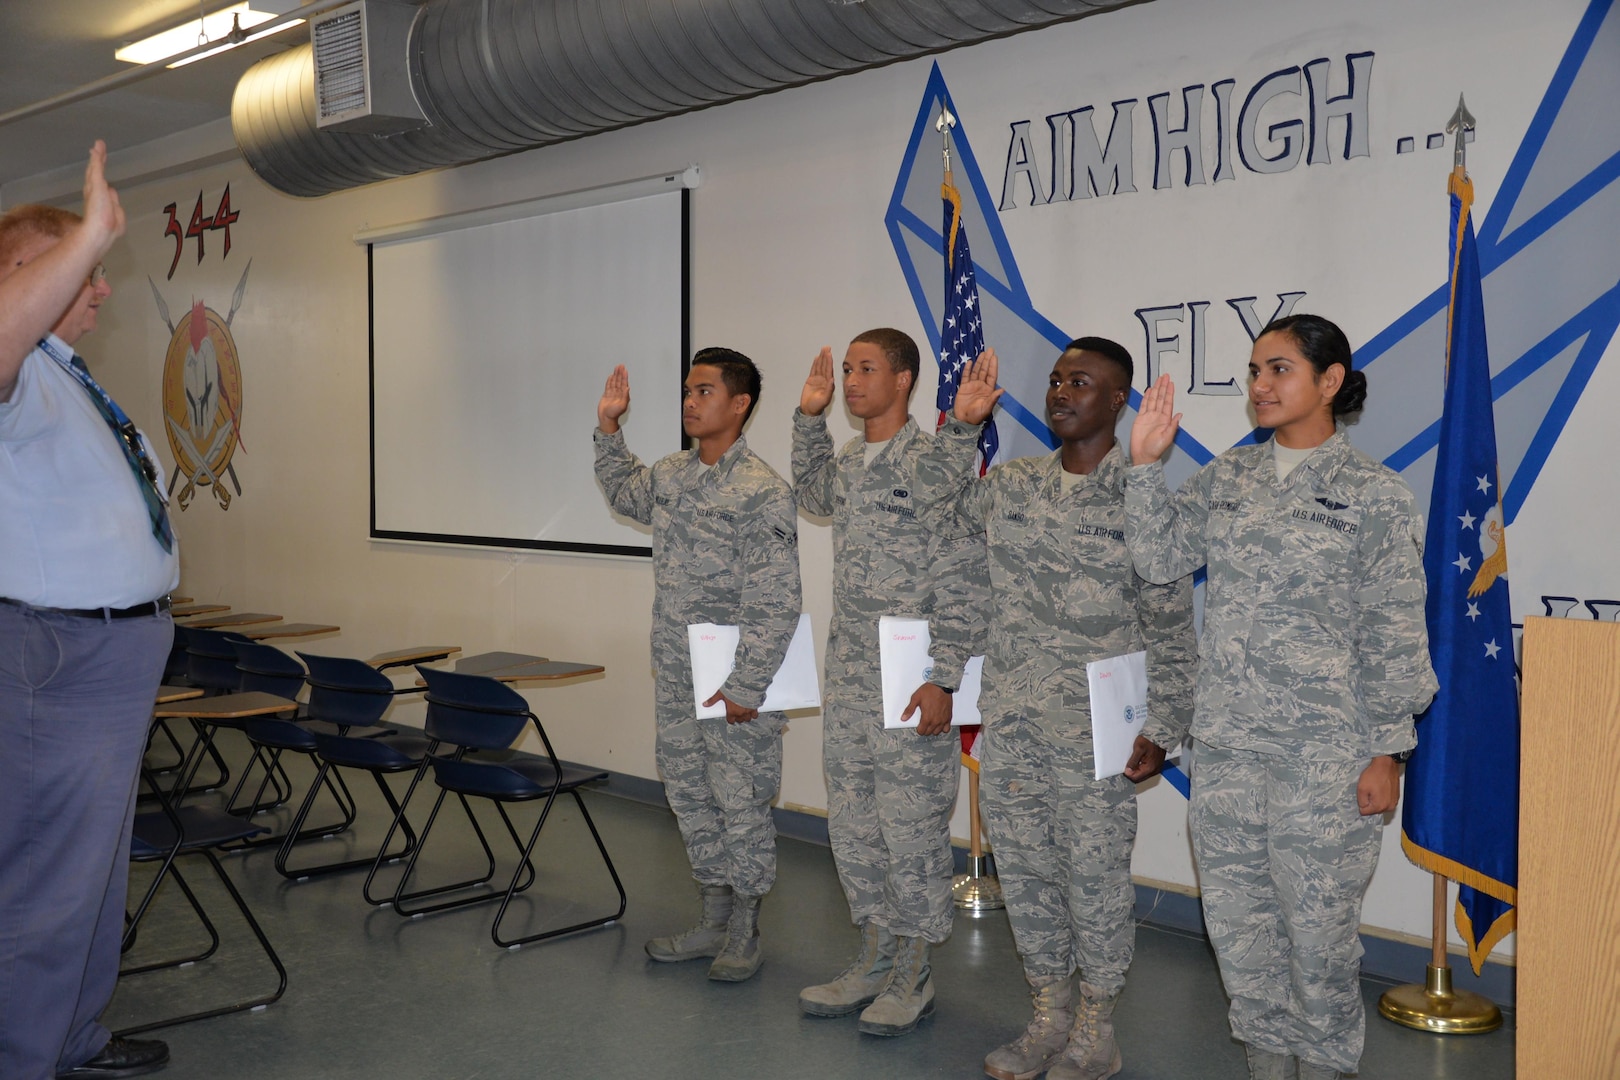 Airmen from the 344 Training Squadron display their immigration packet upon completing the Oath of Allegiance at JBSA-Lackland on Aug. 30.